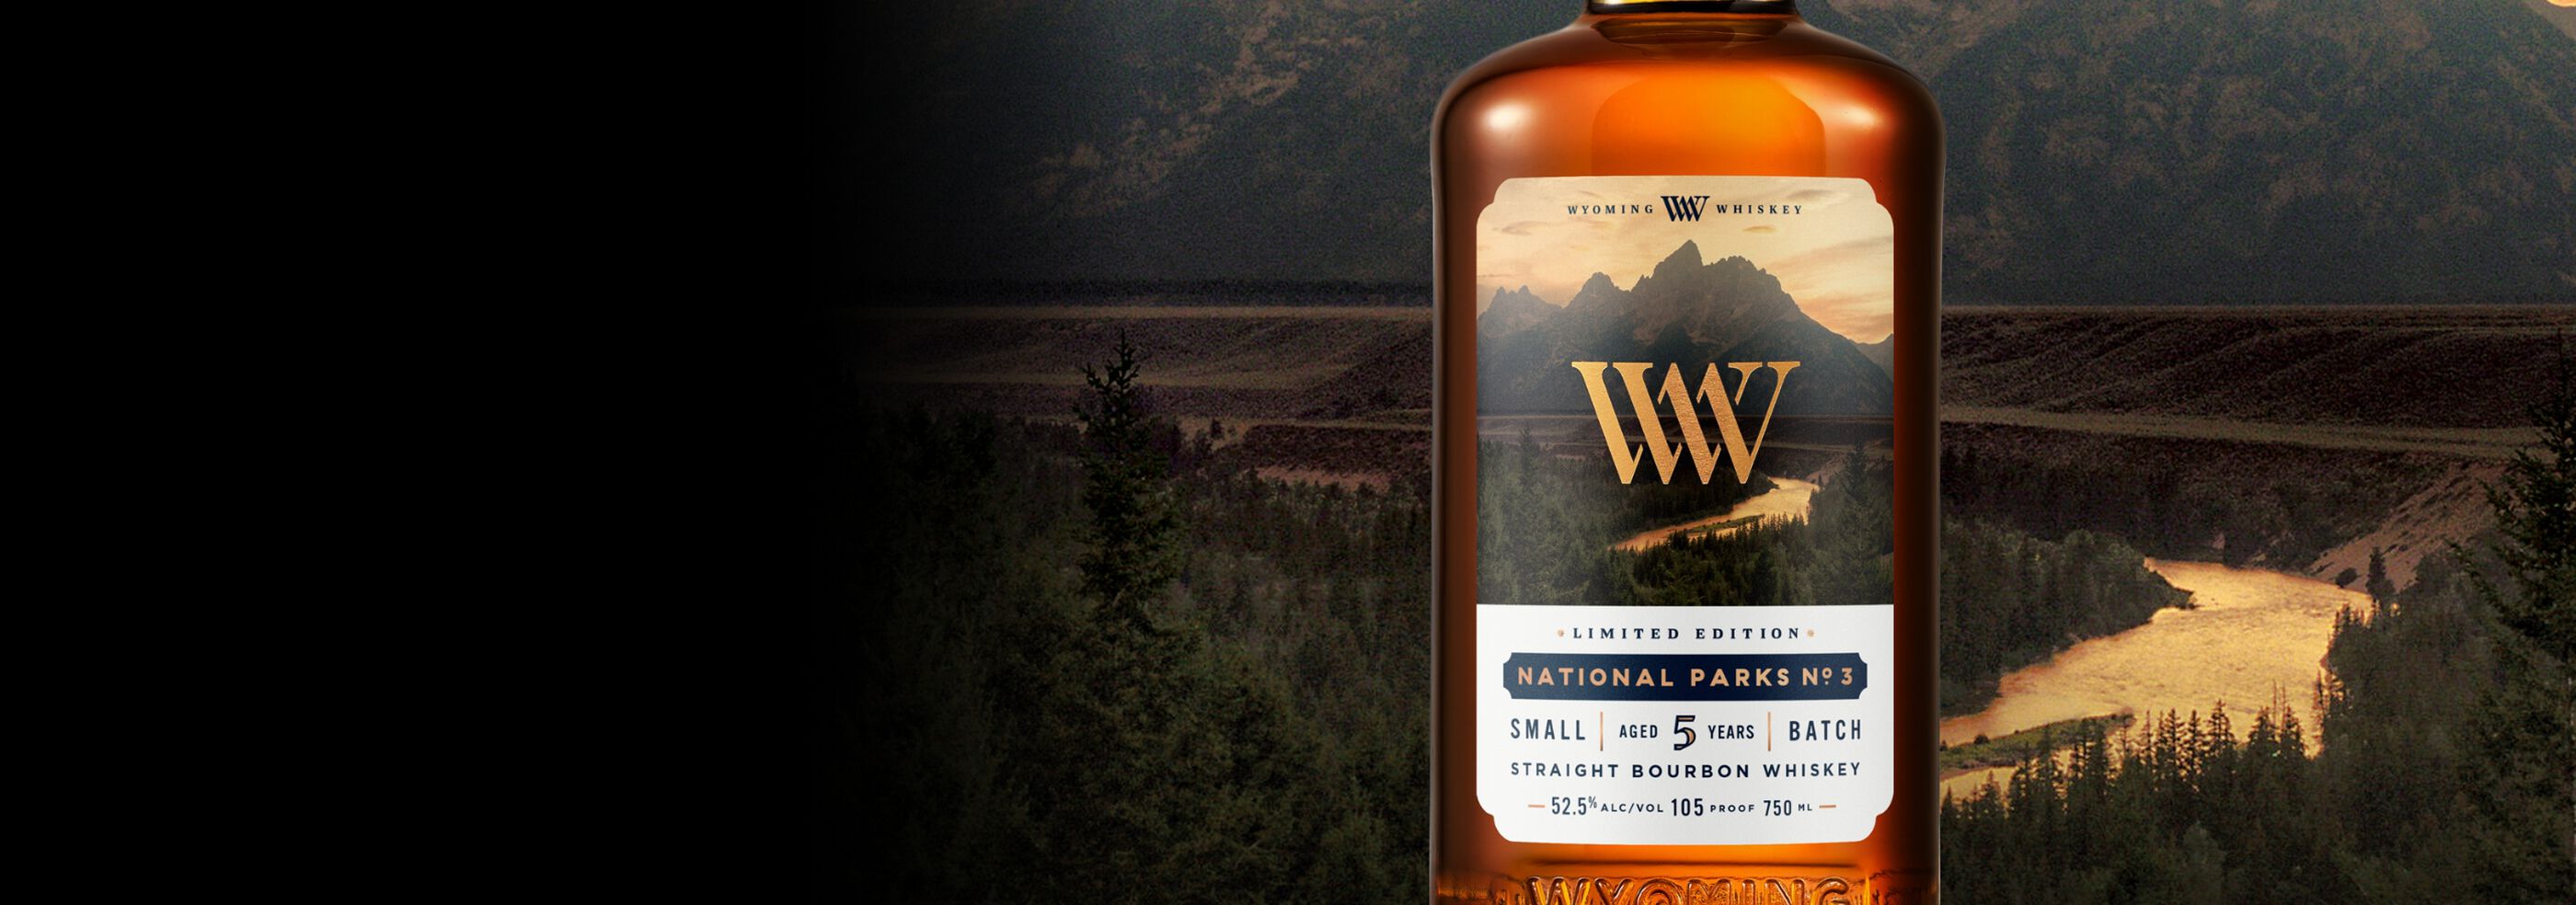 Bottle of Wyoming Whiskey National Parks No. 3